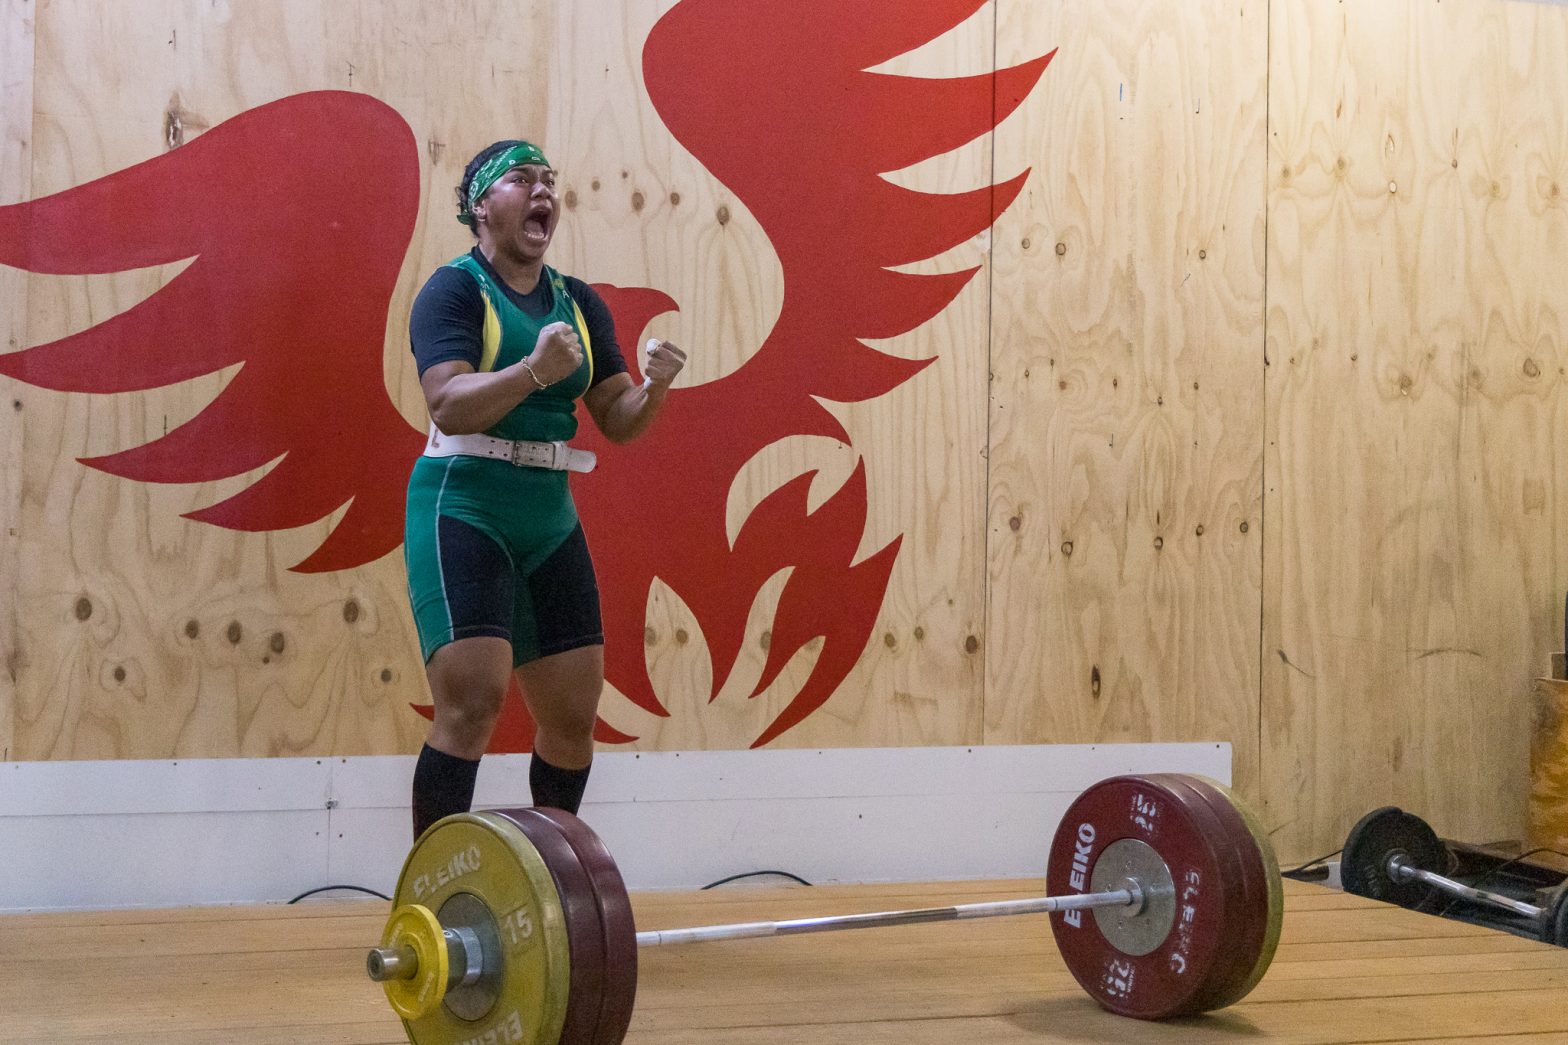 Phoenix Weightlifting Club - Olympic Weightlifting in SE Melbourne, Victoria